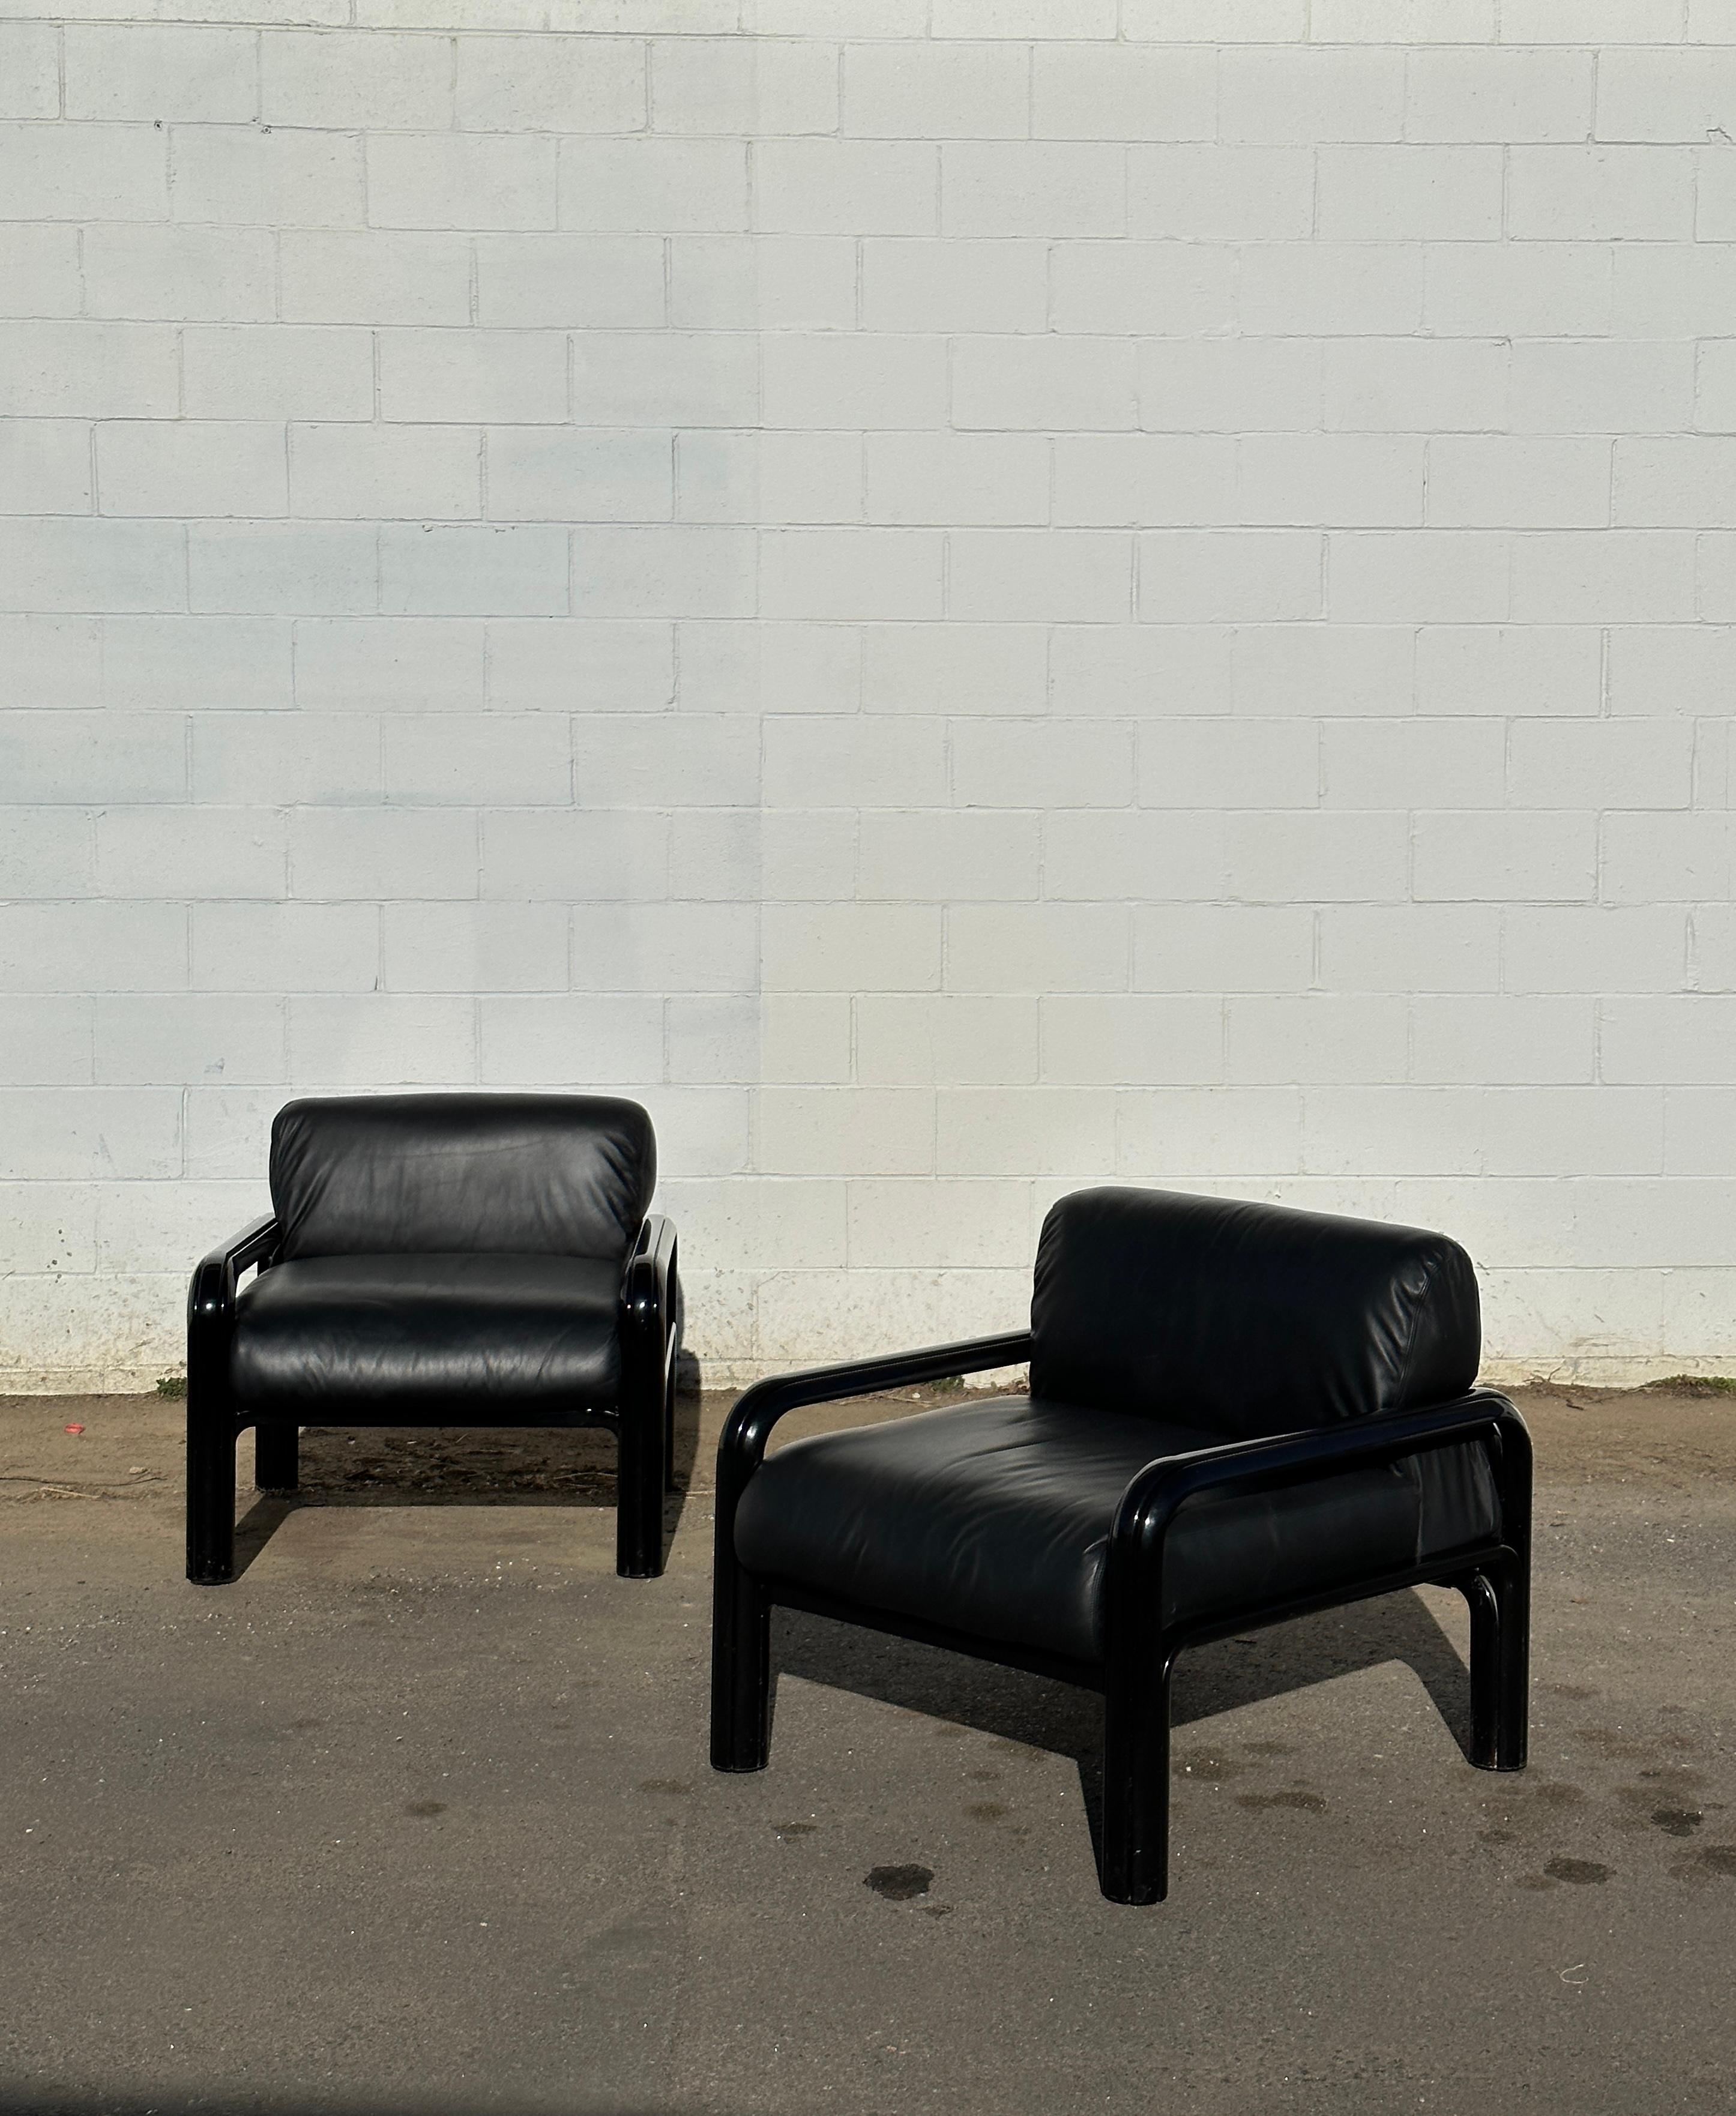 Italian Pair of Gae Aulenti Black Leather Lounge Chairs for Knoll, Marked